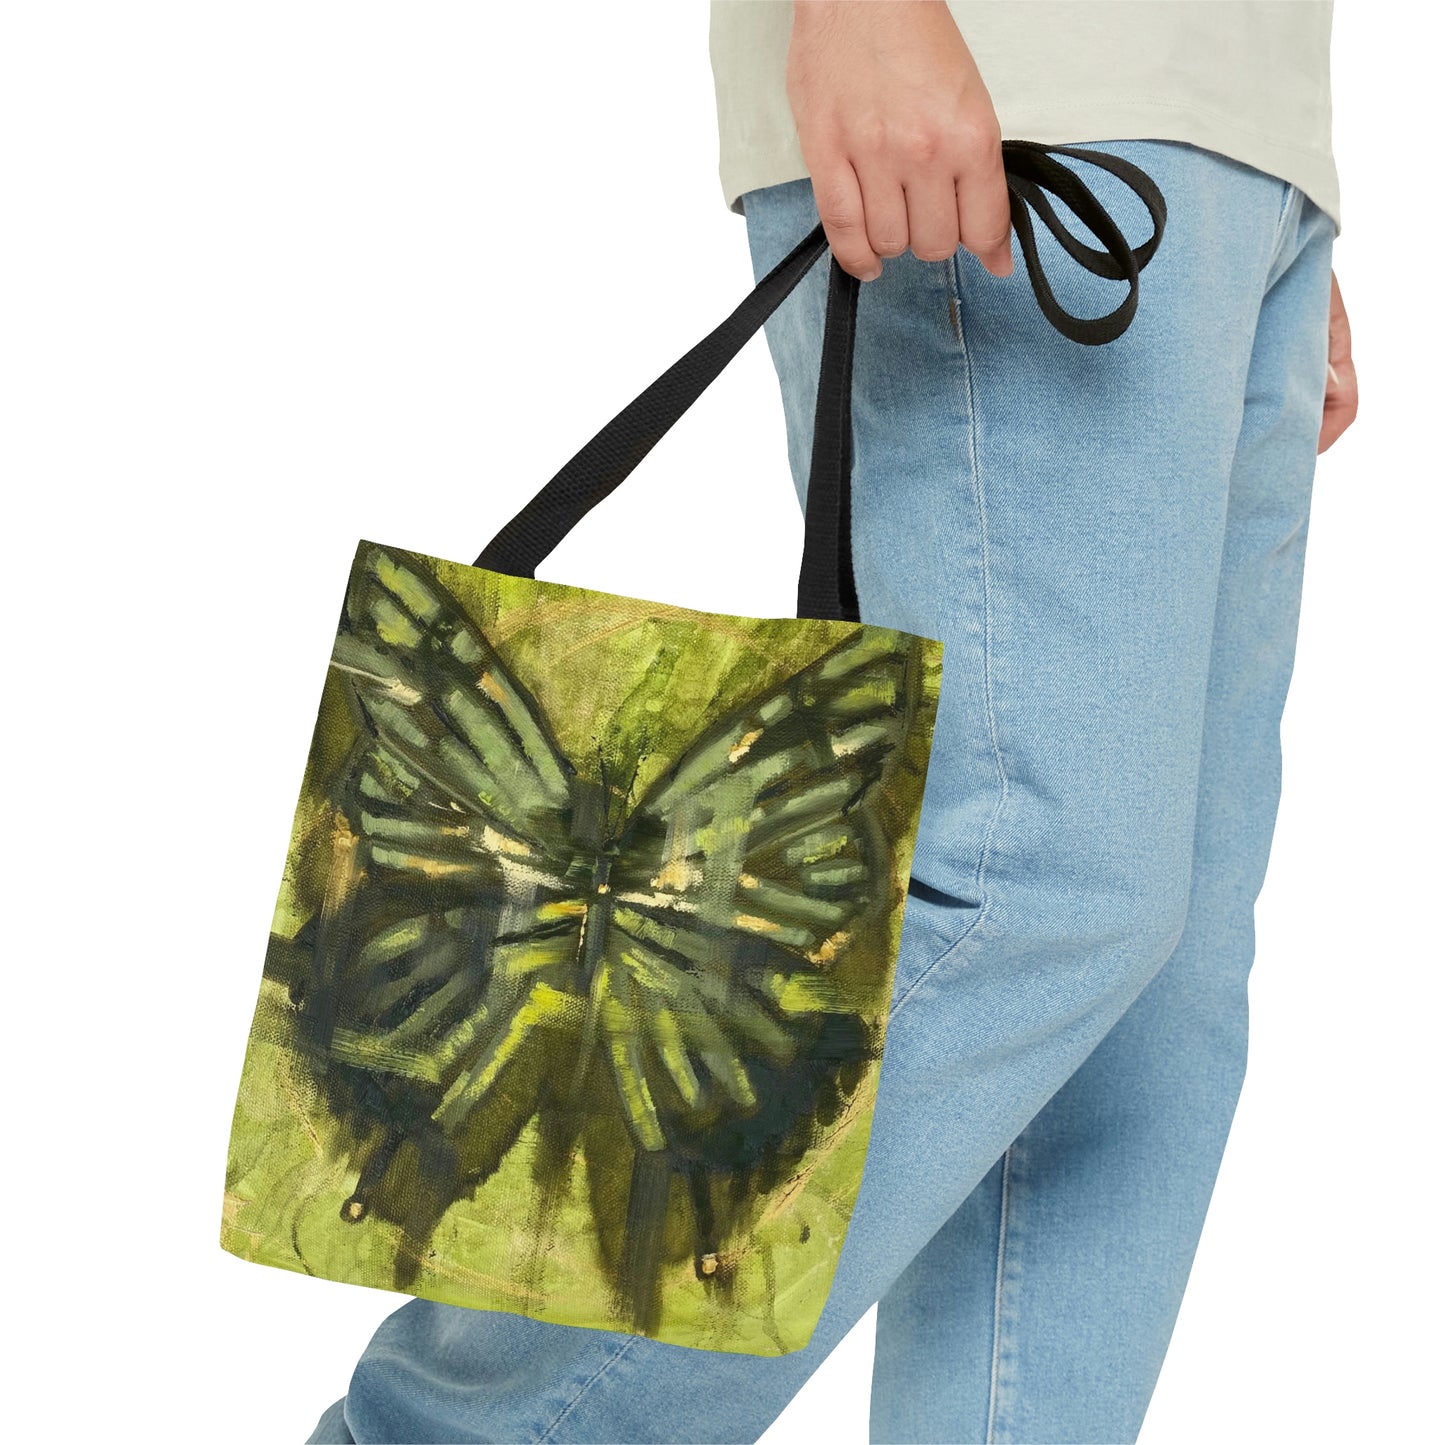 Green Butterfly Tote Bag